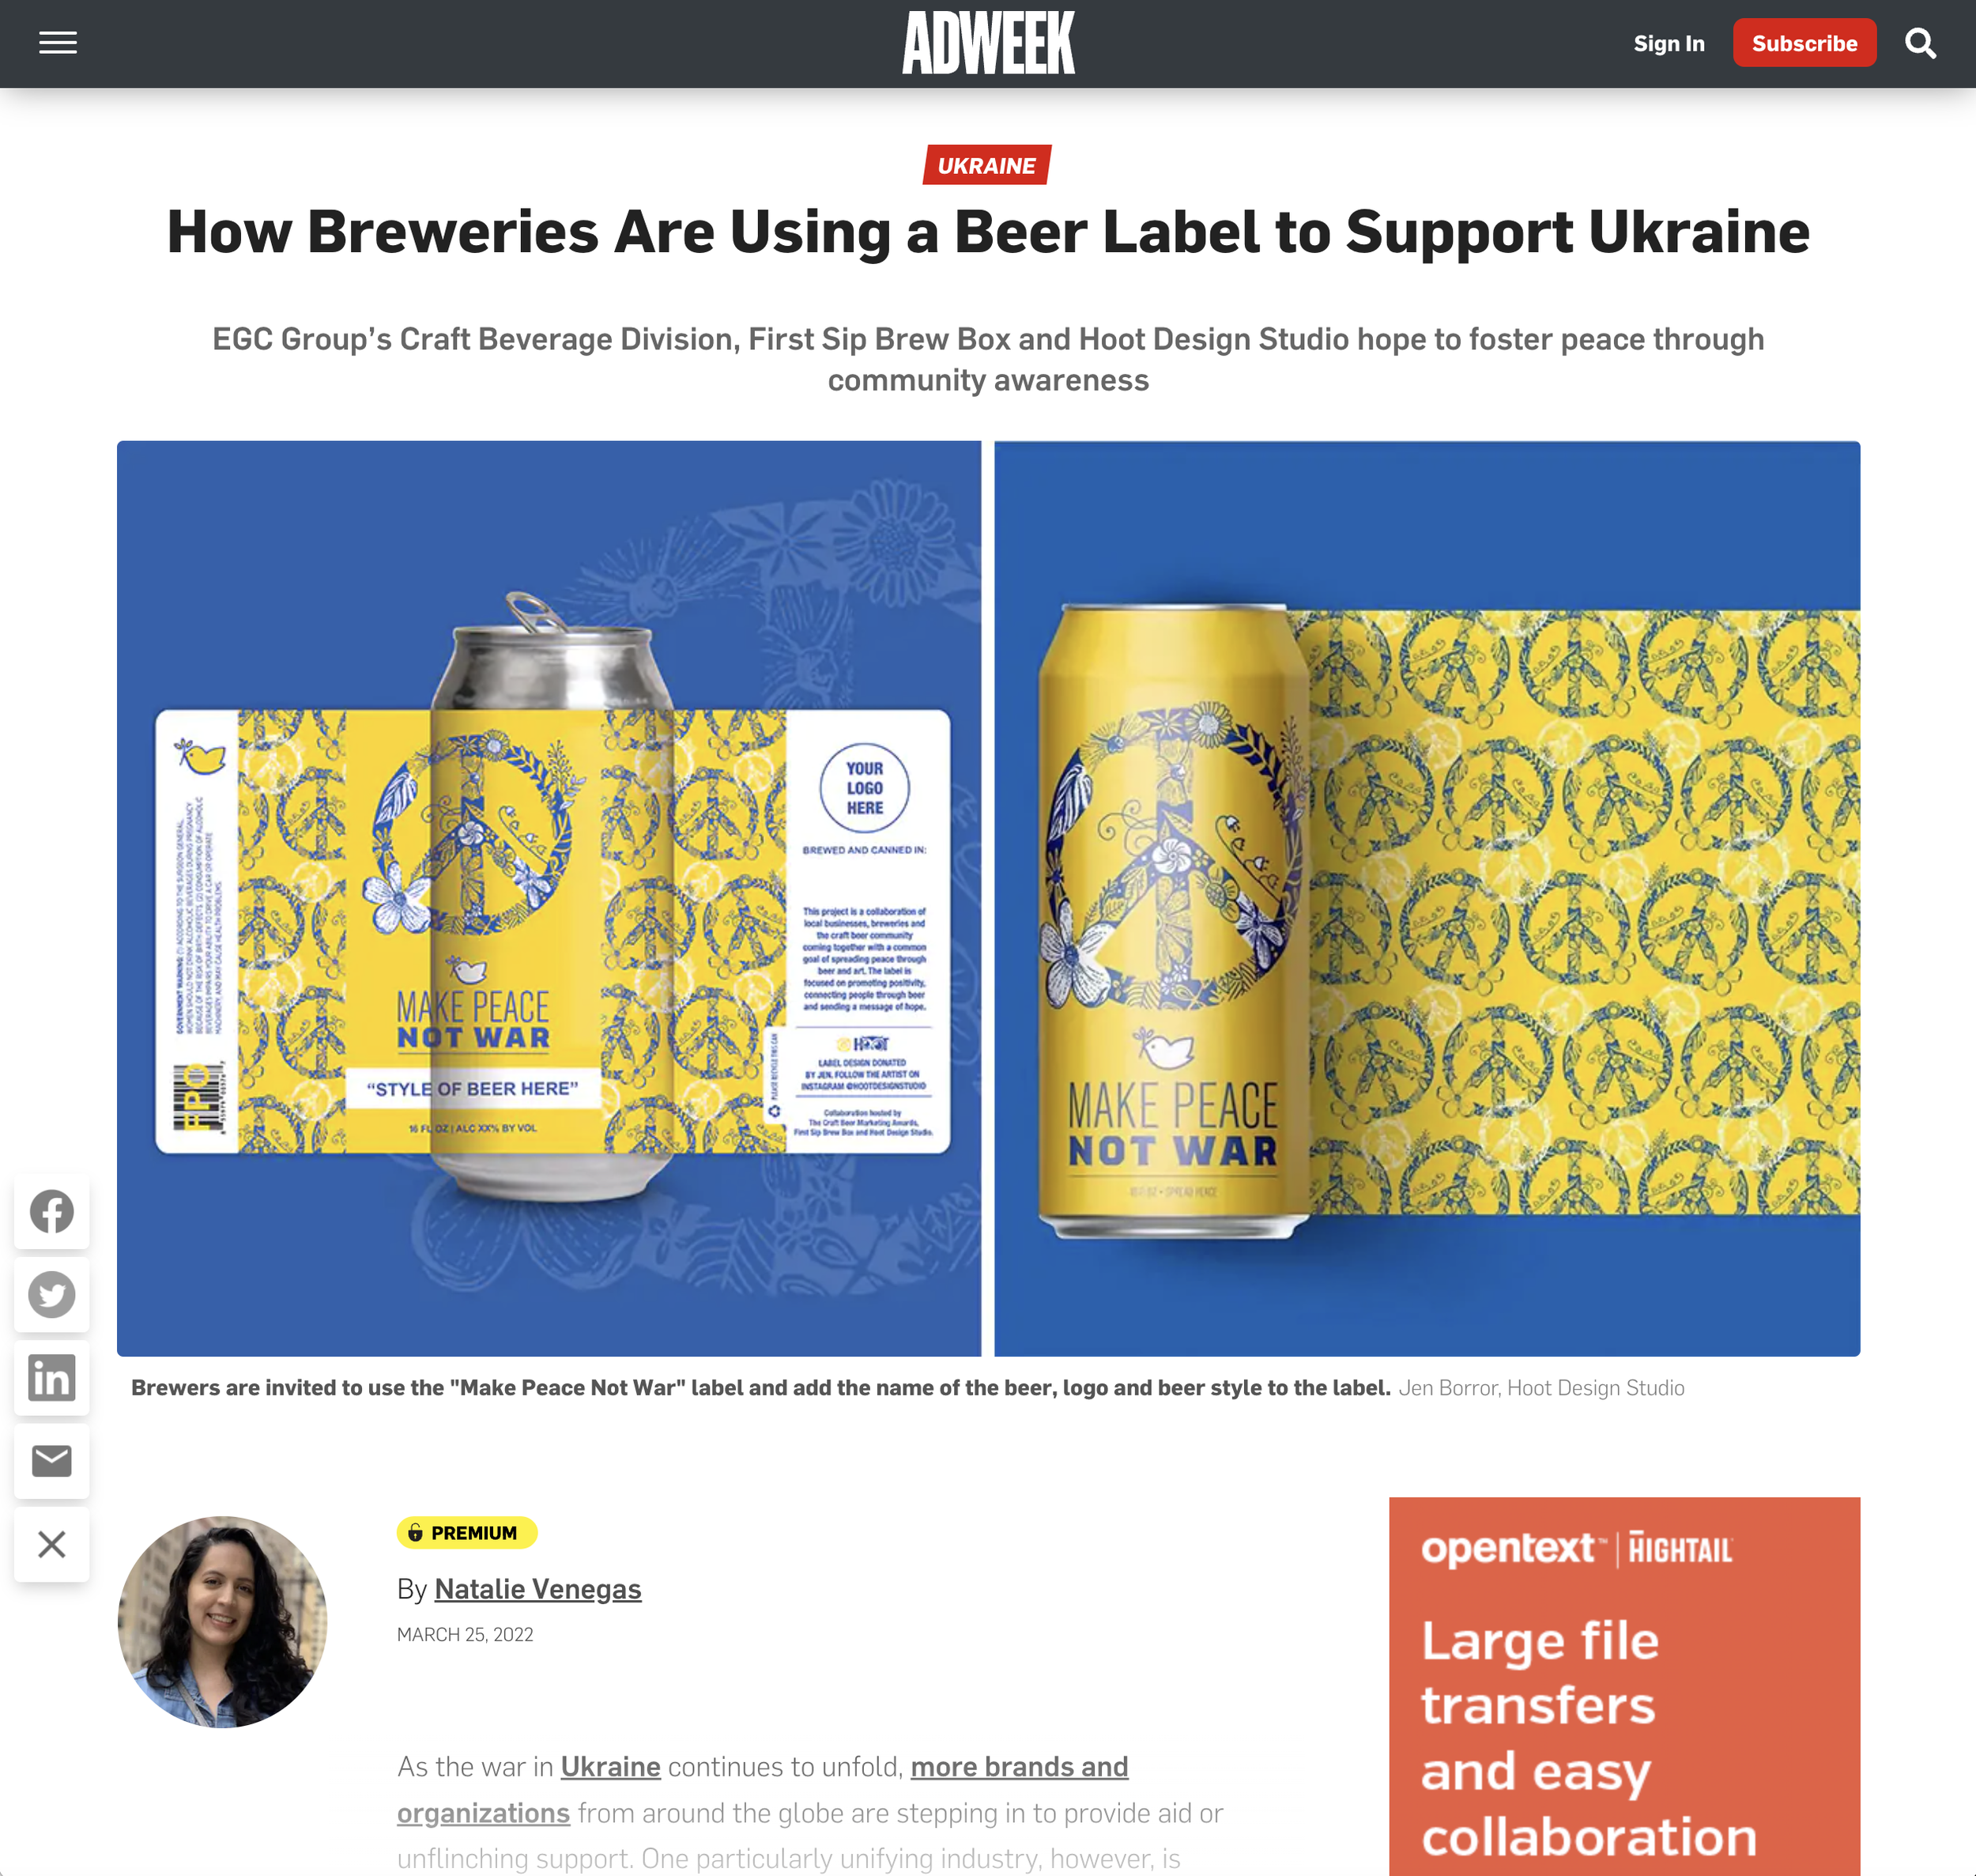 ADWEEK - How Breweries Are Using a Beer Label to Support Ukraine